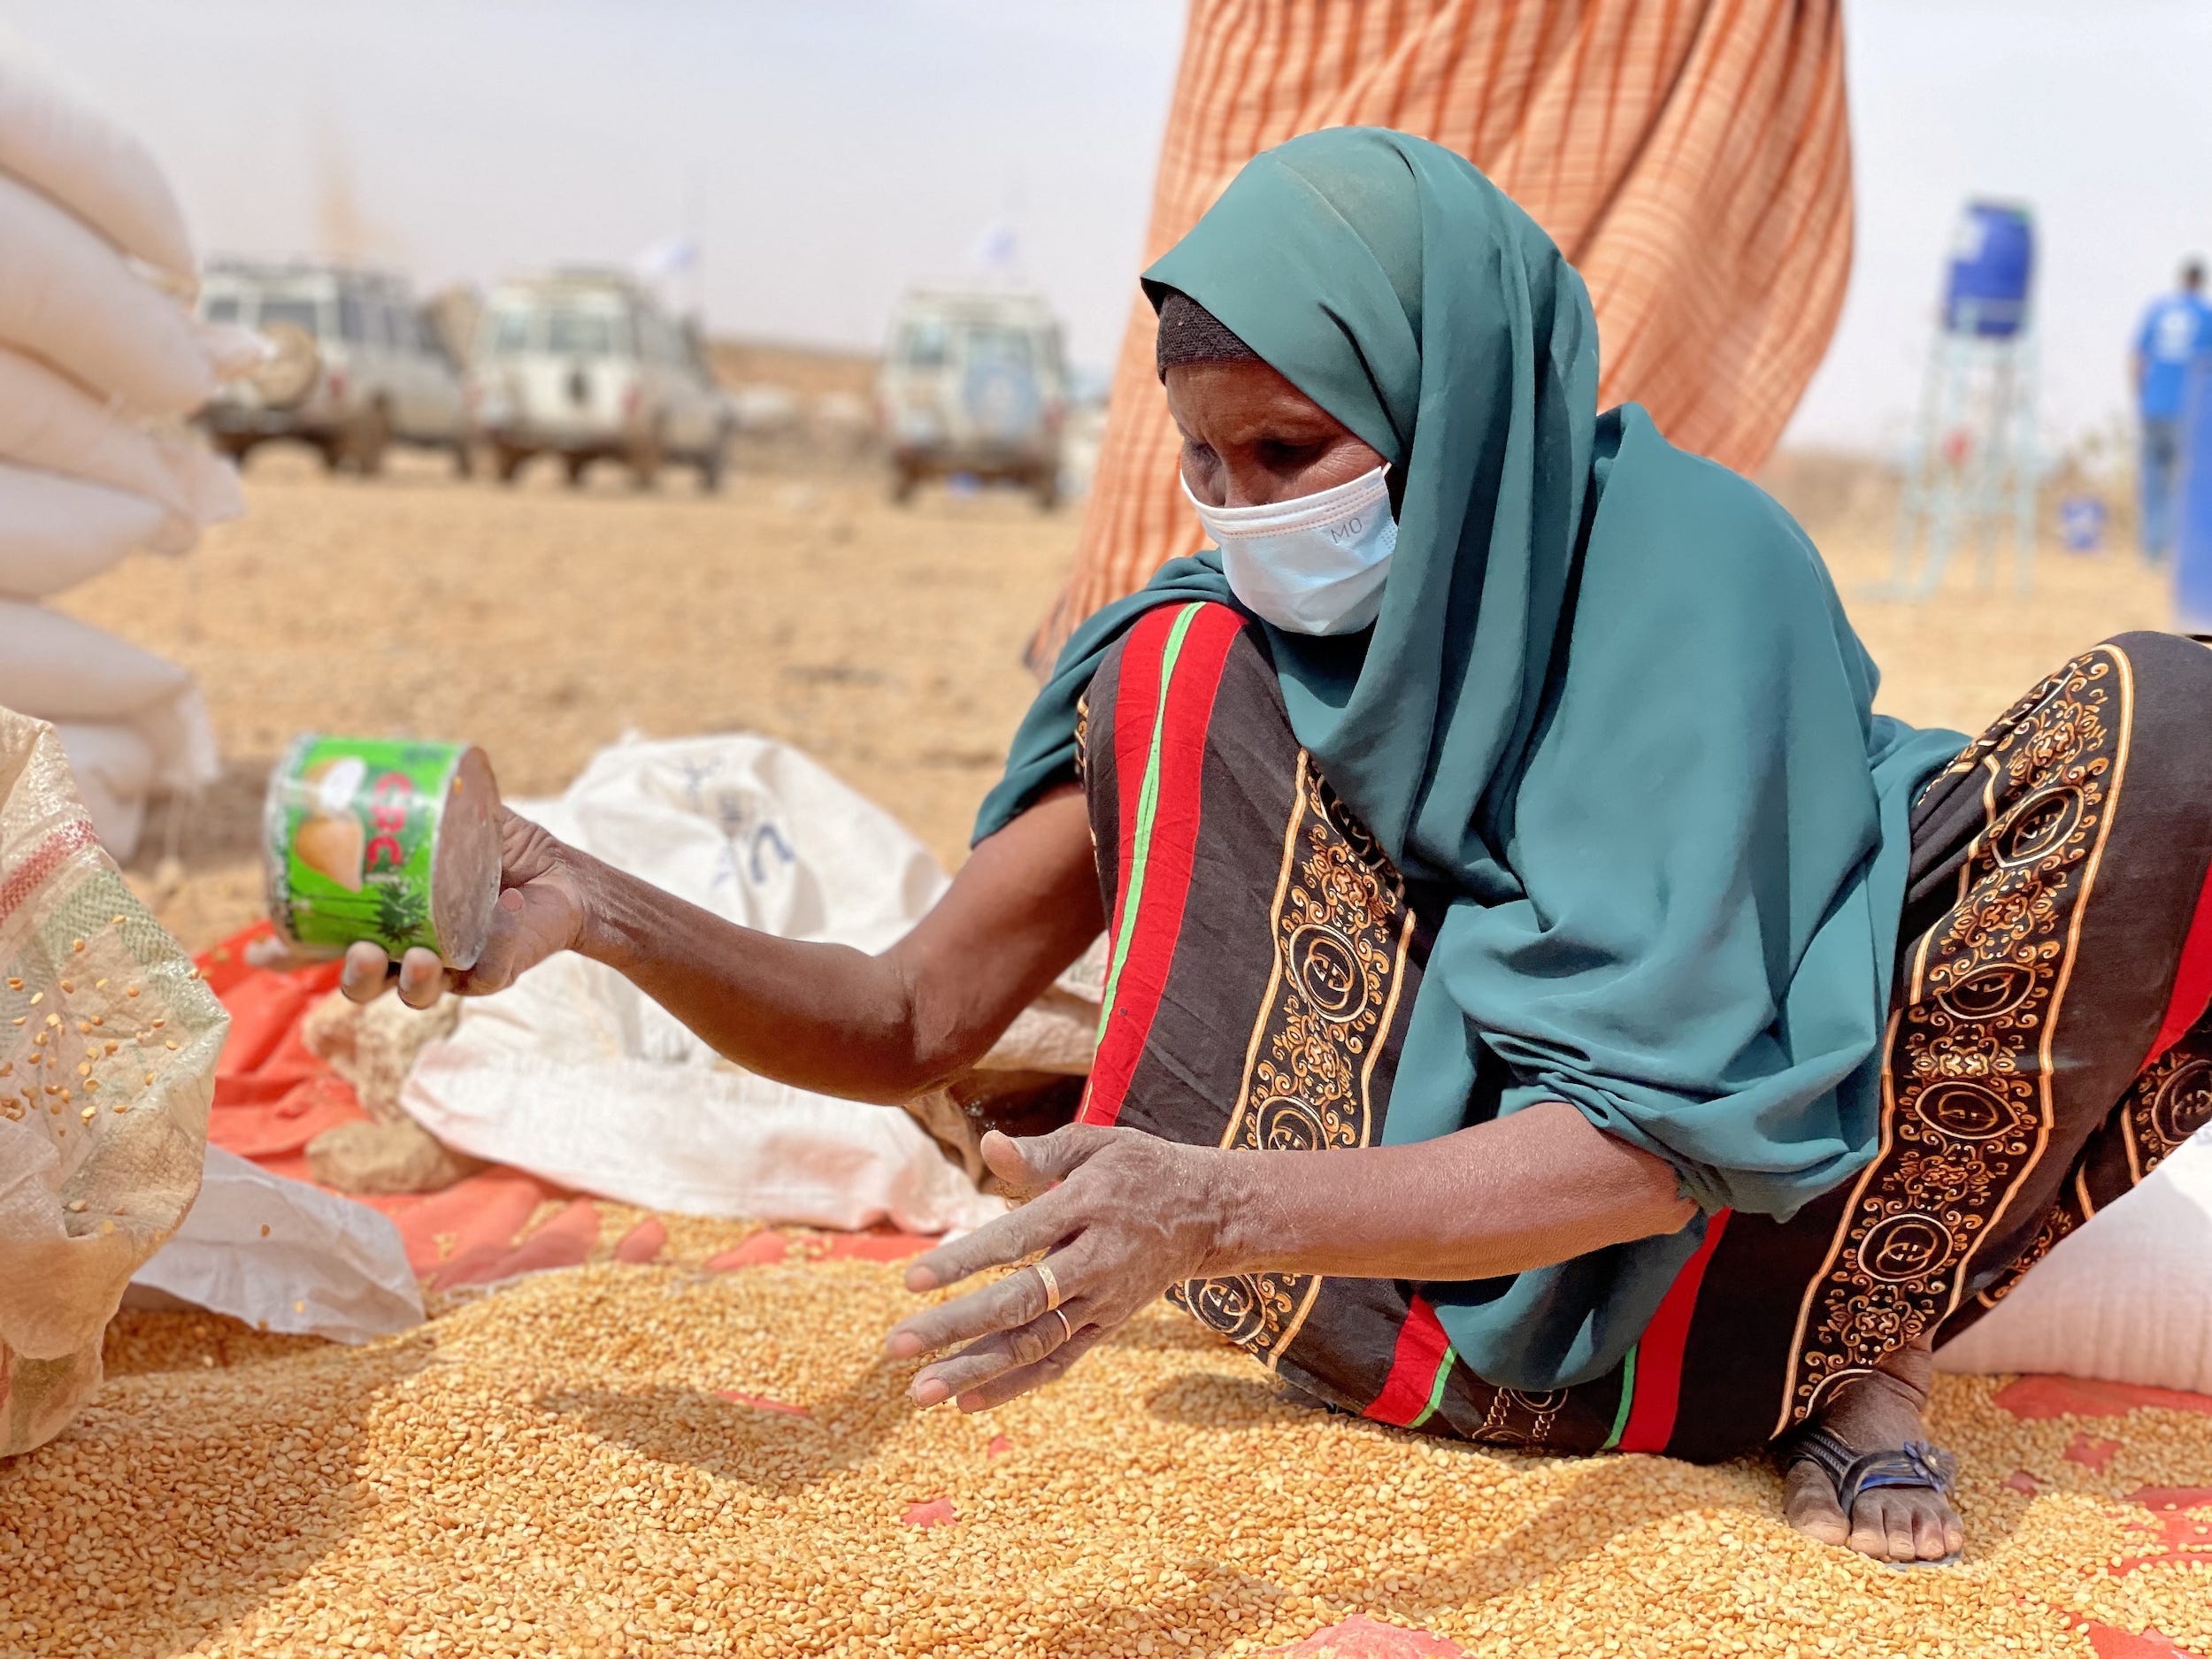 woman in headscarf squats to collect grain